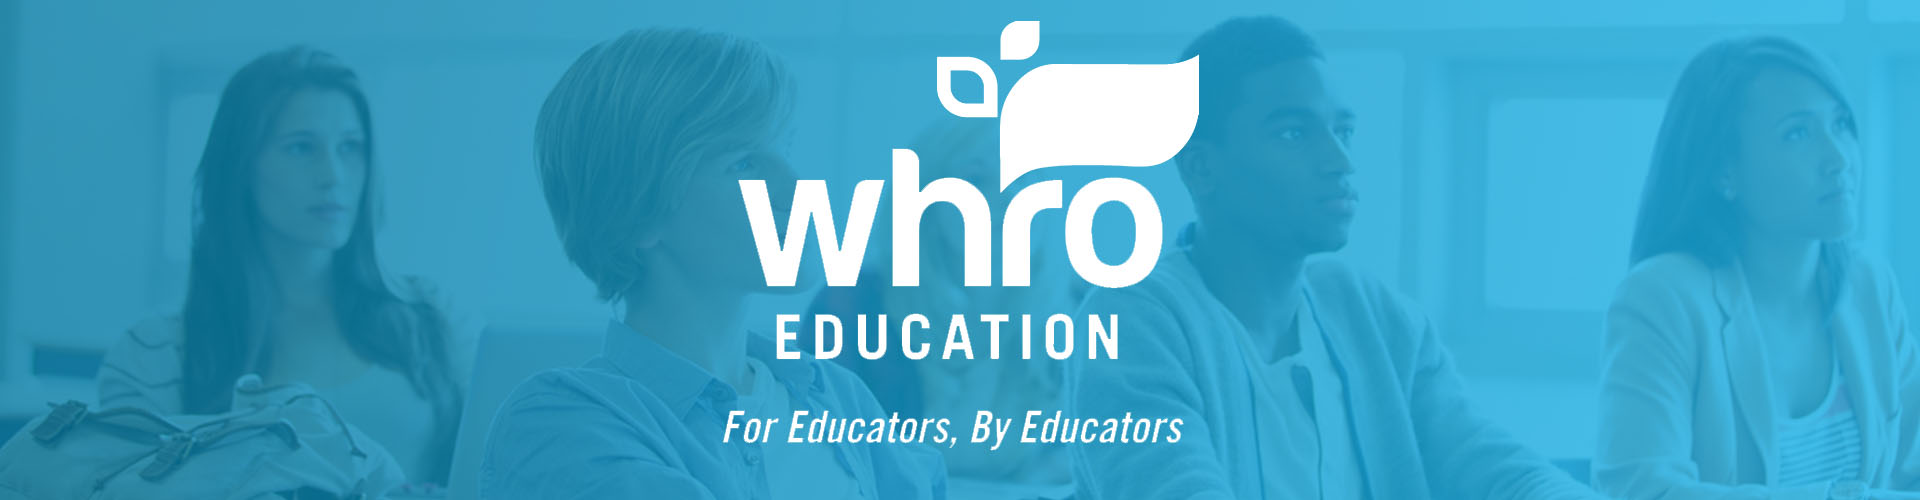 Image for WHRO Education